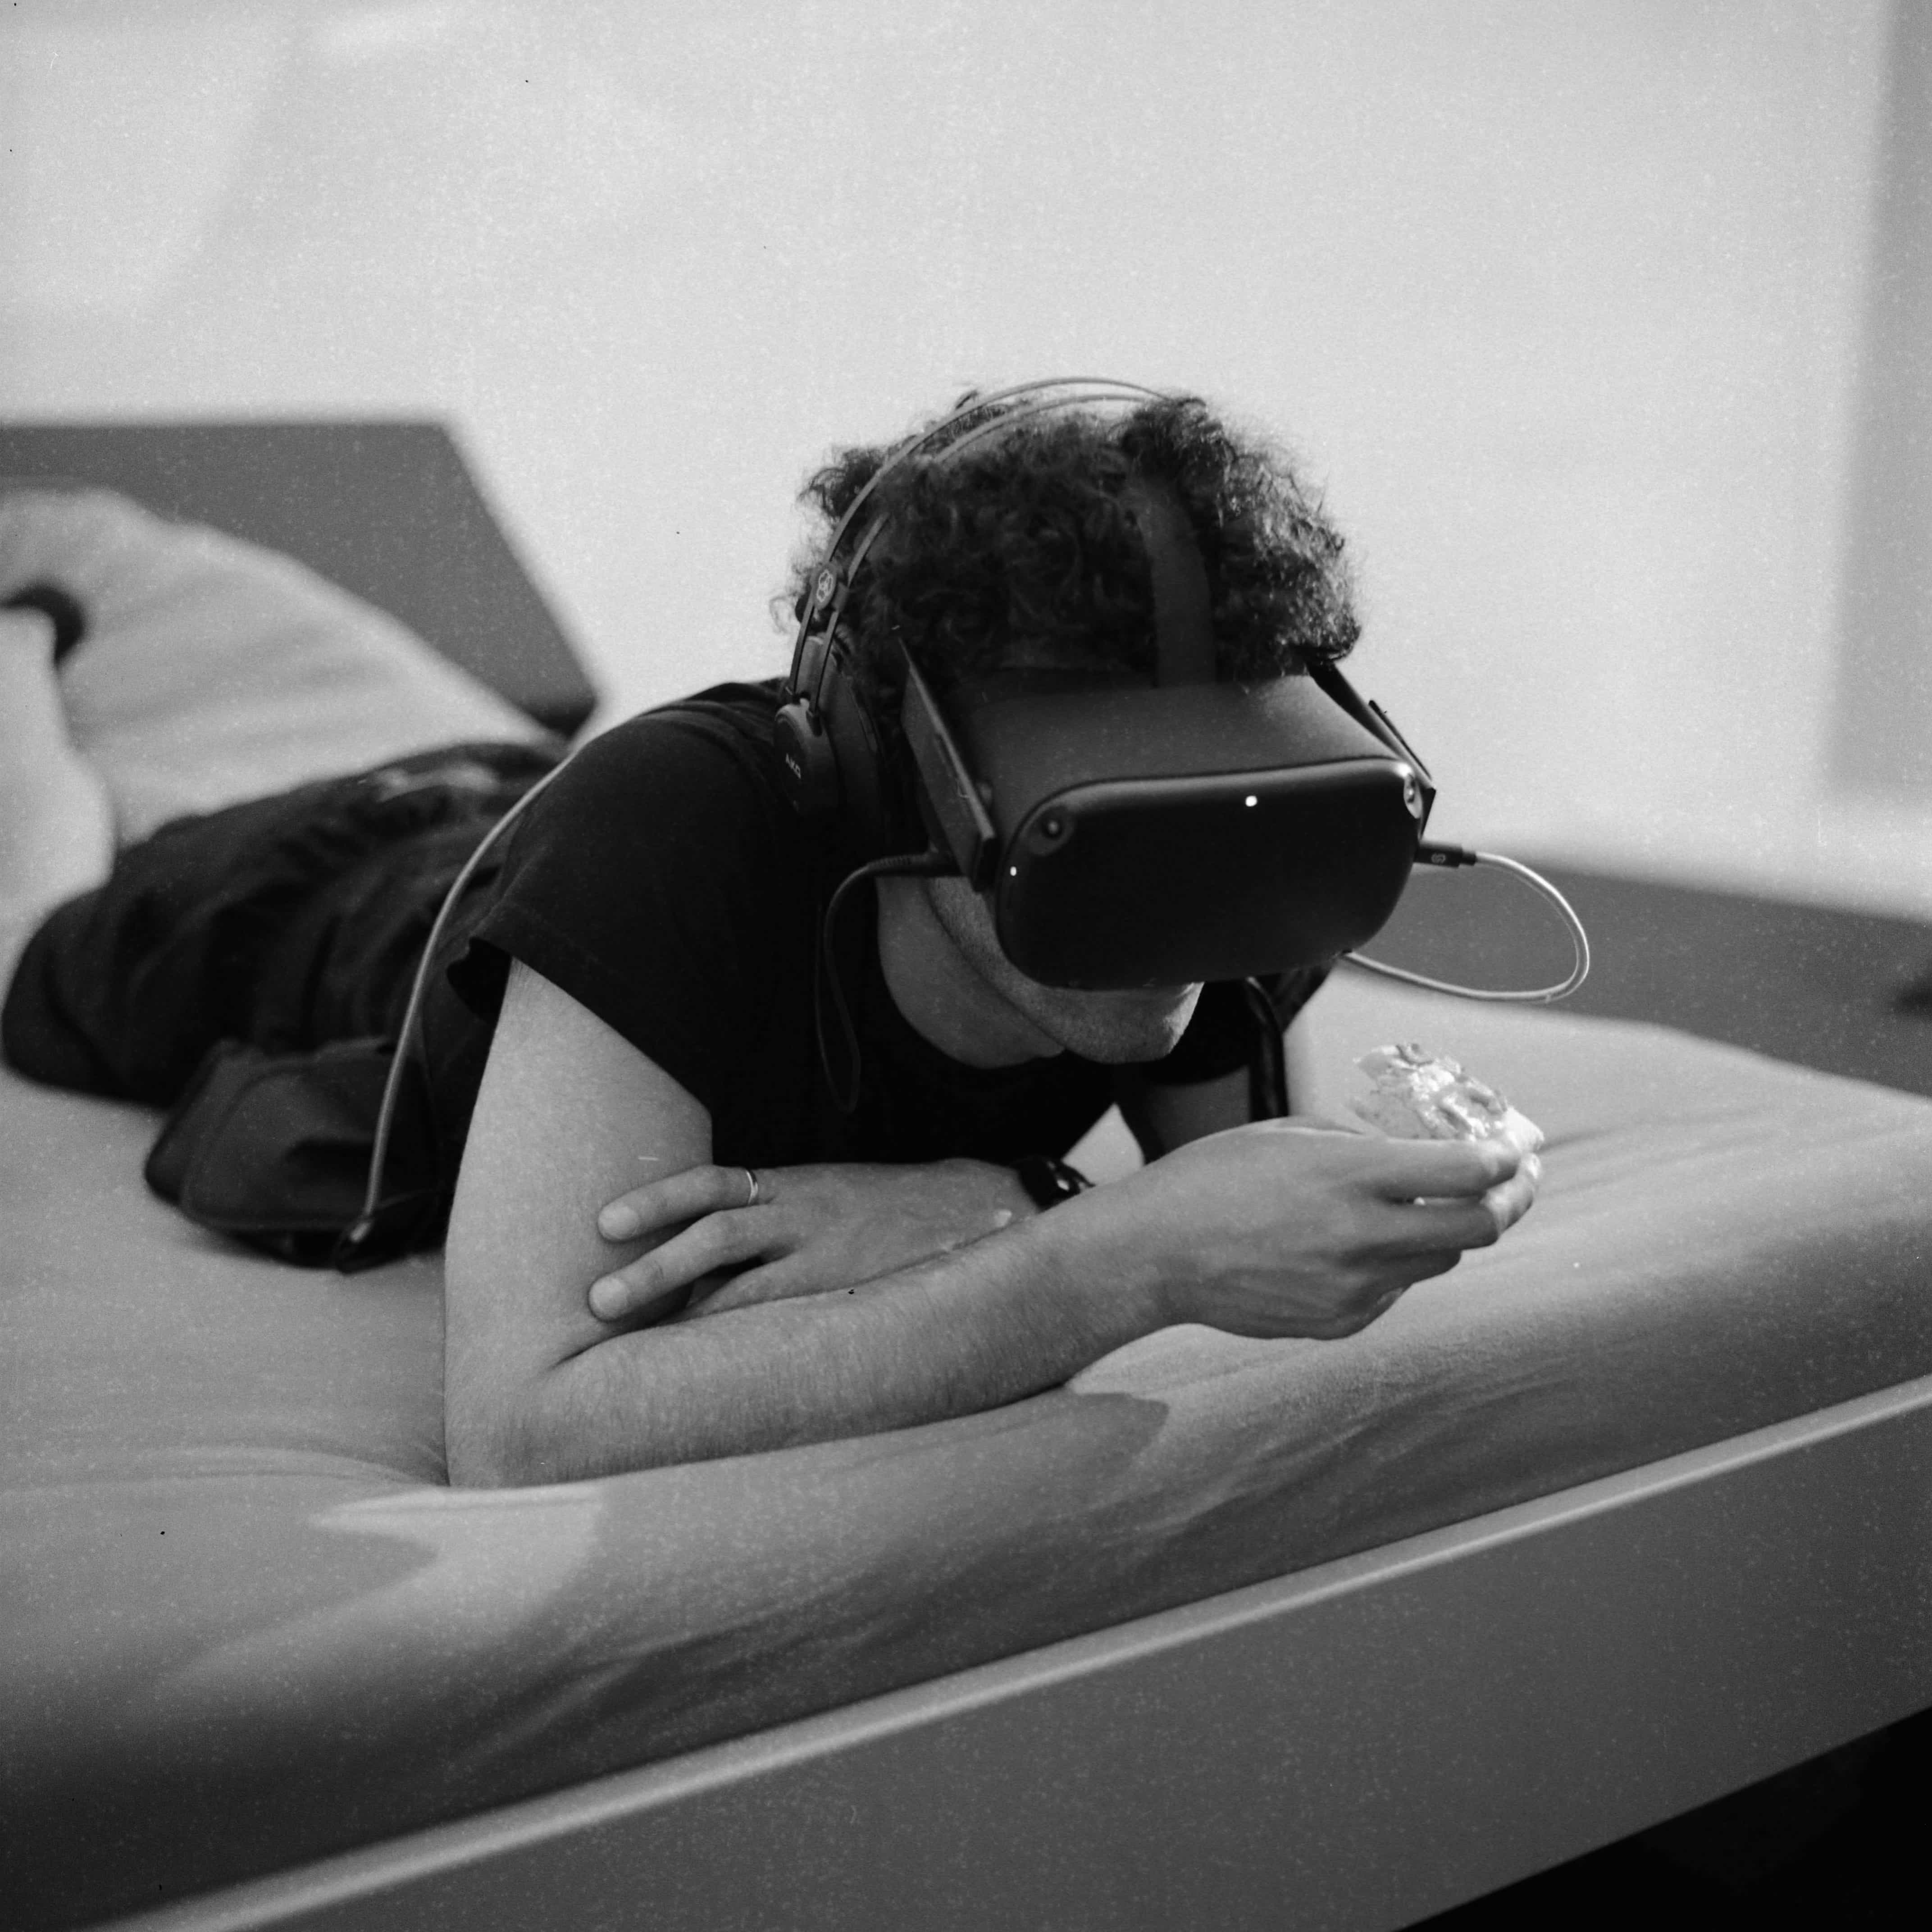 The artist with the VR headset on, eating pizza in bed.